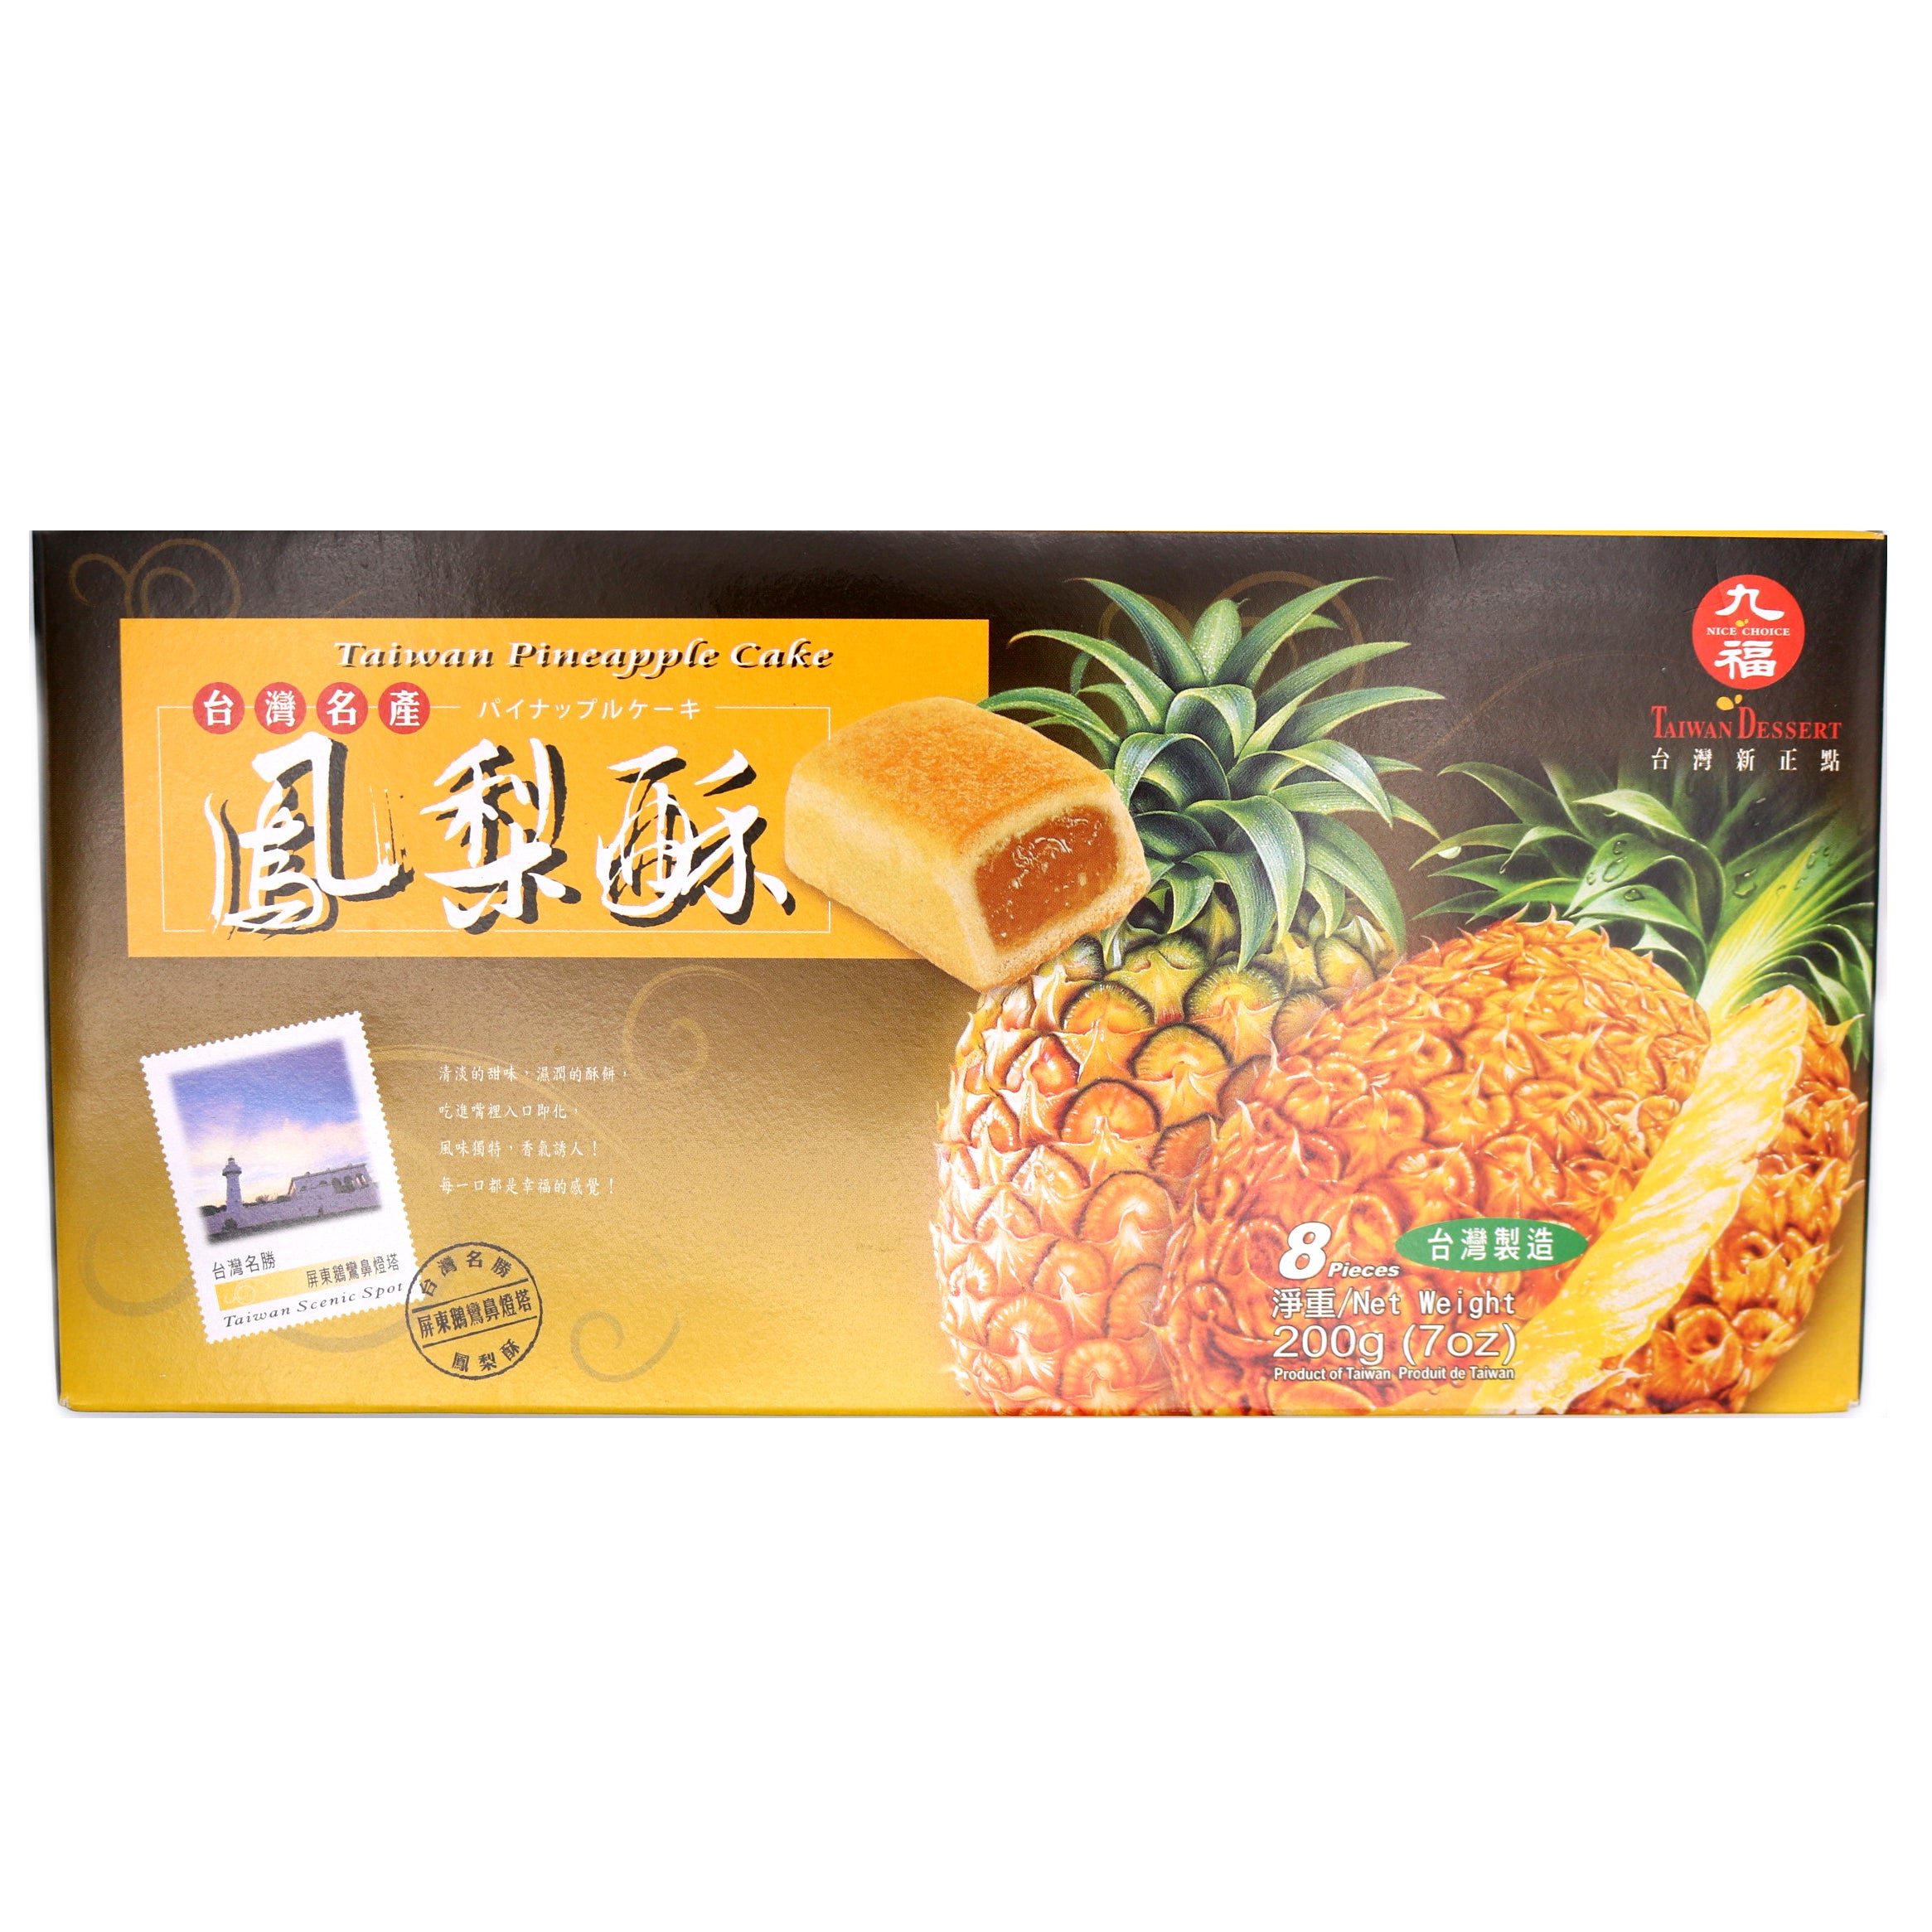 Taiwan Guide | Sunny Hills 微熱山丘: the best pineapple cake in Taiwan